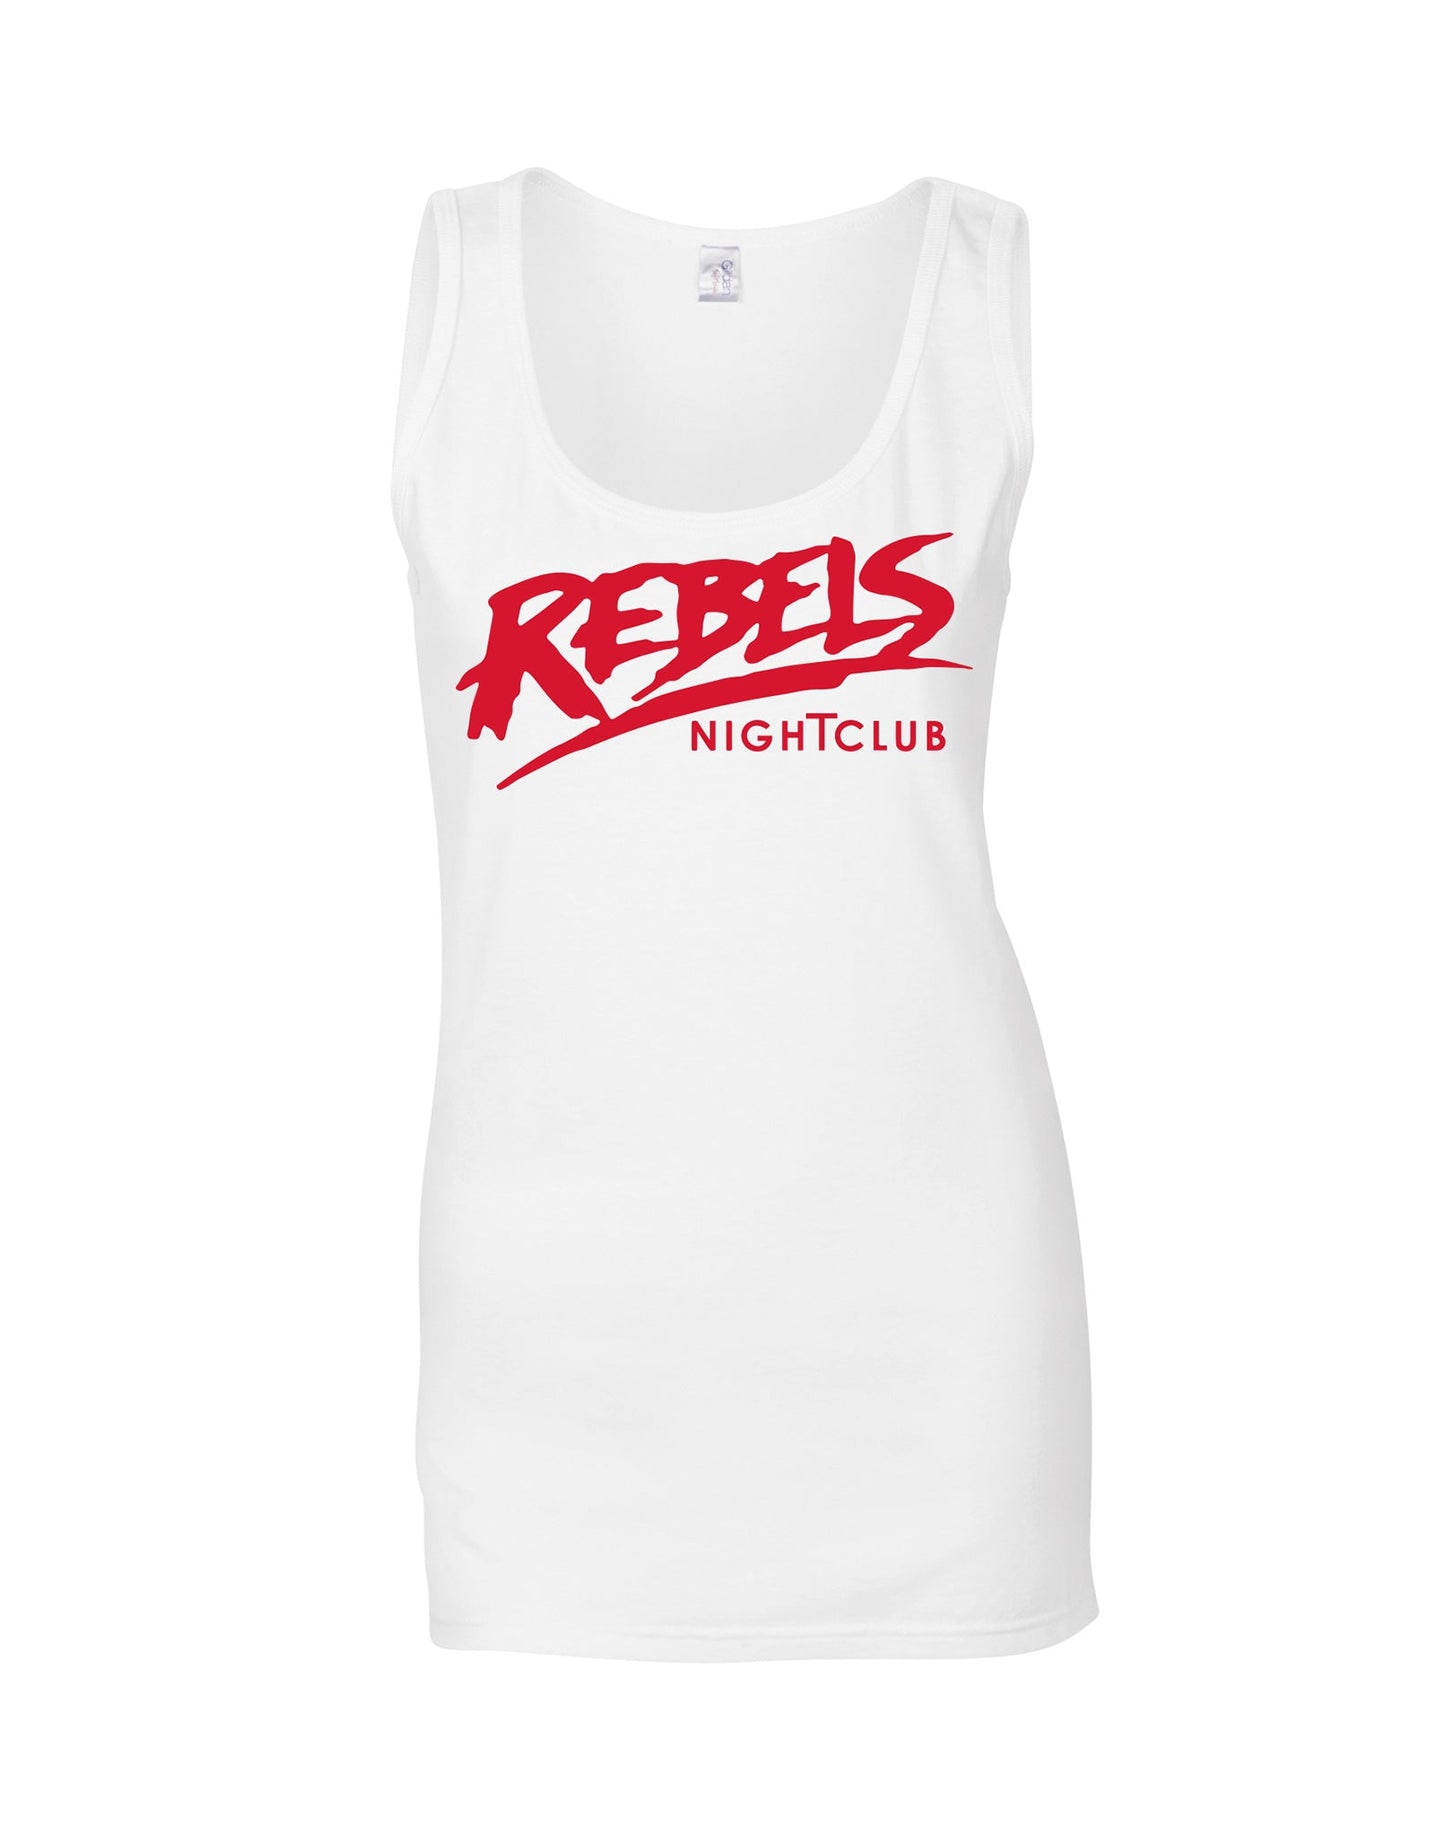 Rebels nightclub sign ladies fit vest - various colours - Dirty Stop Outs